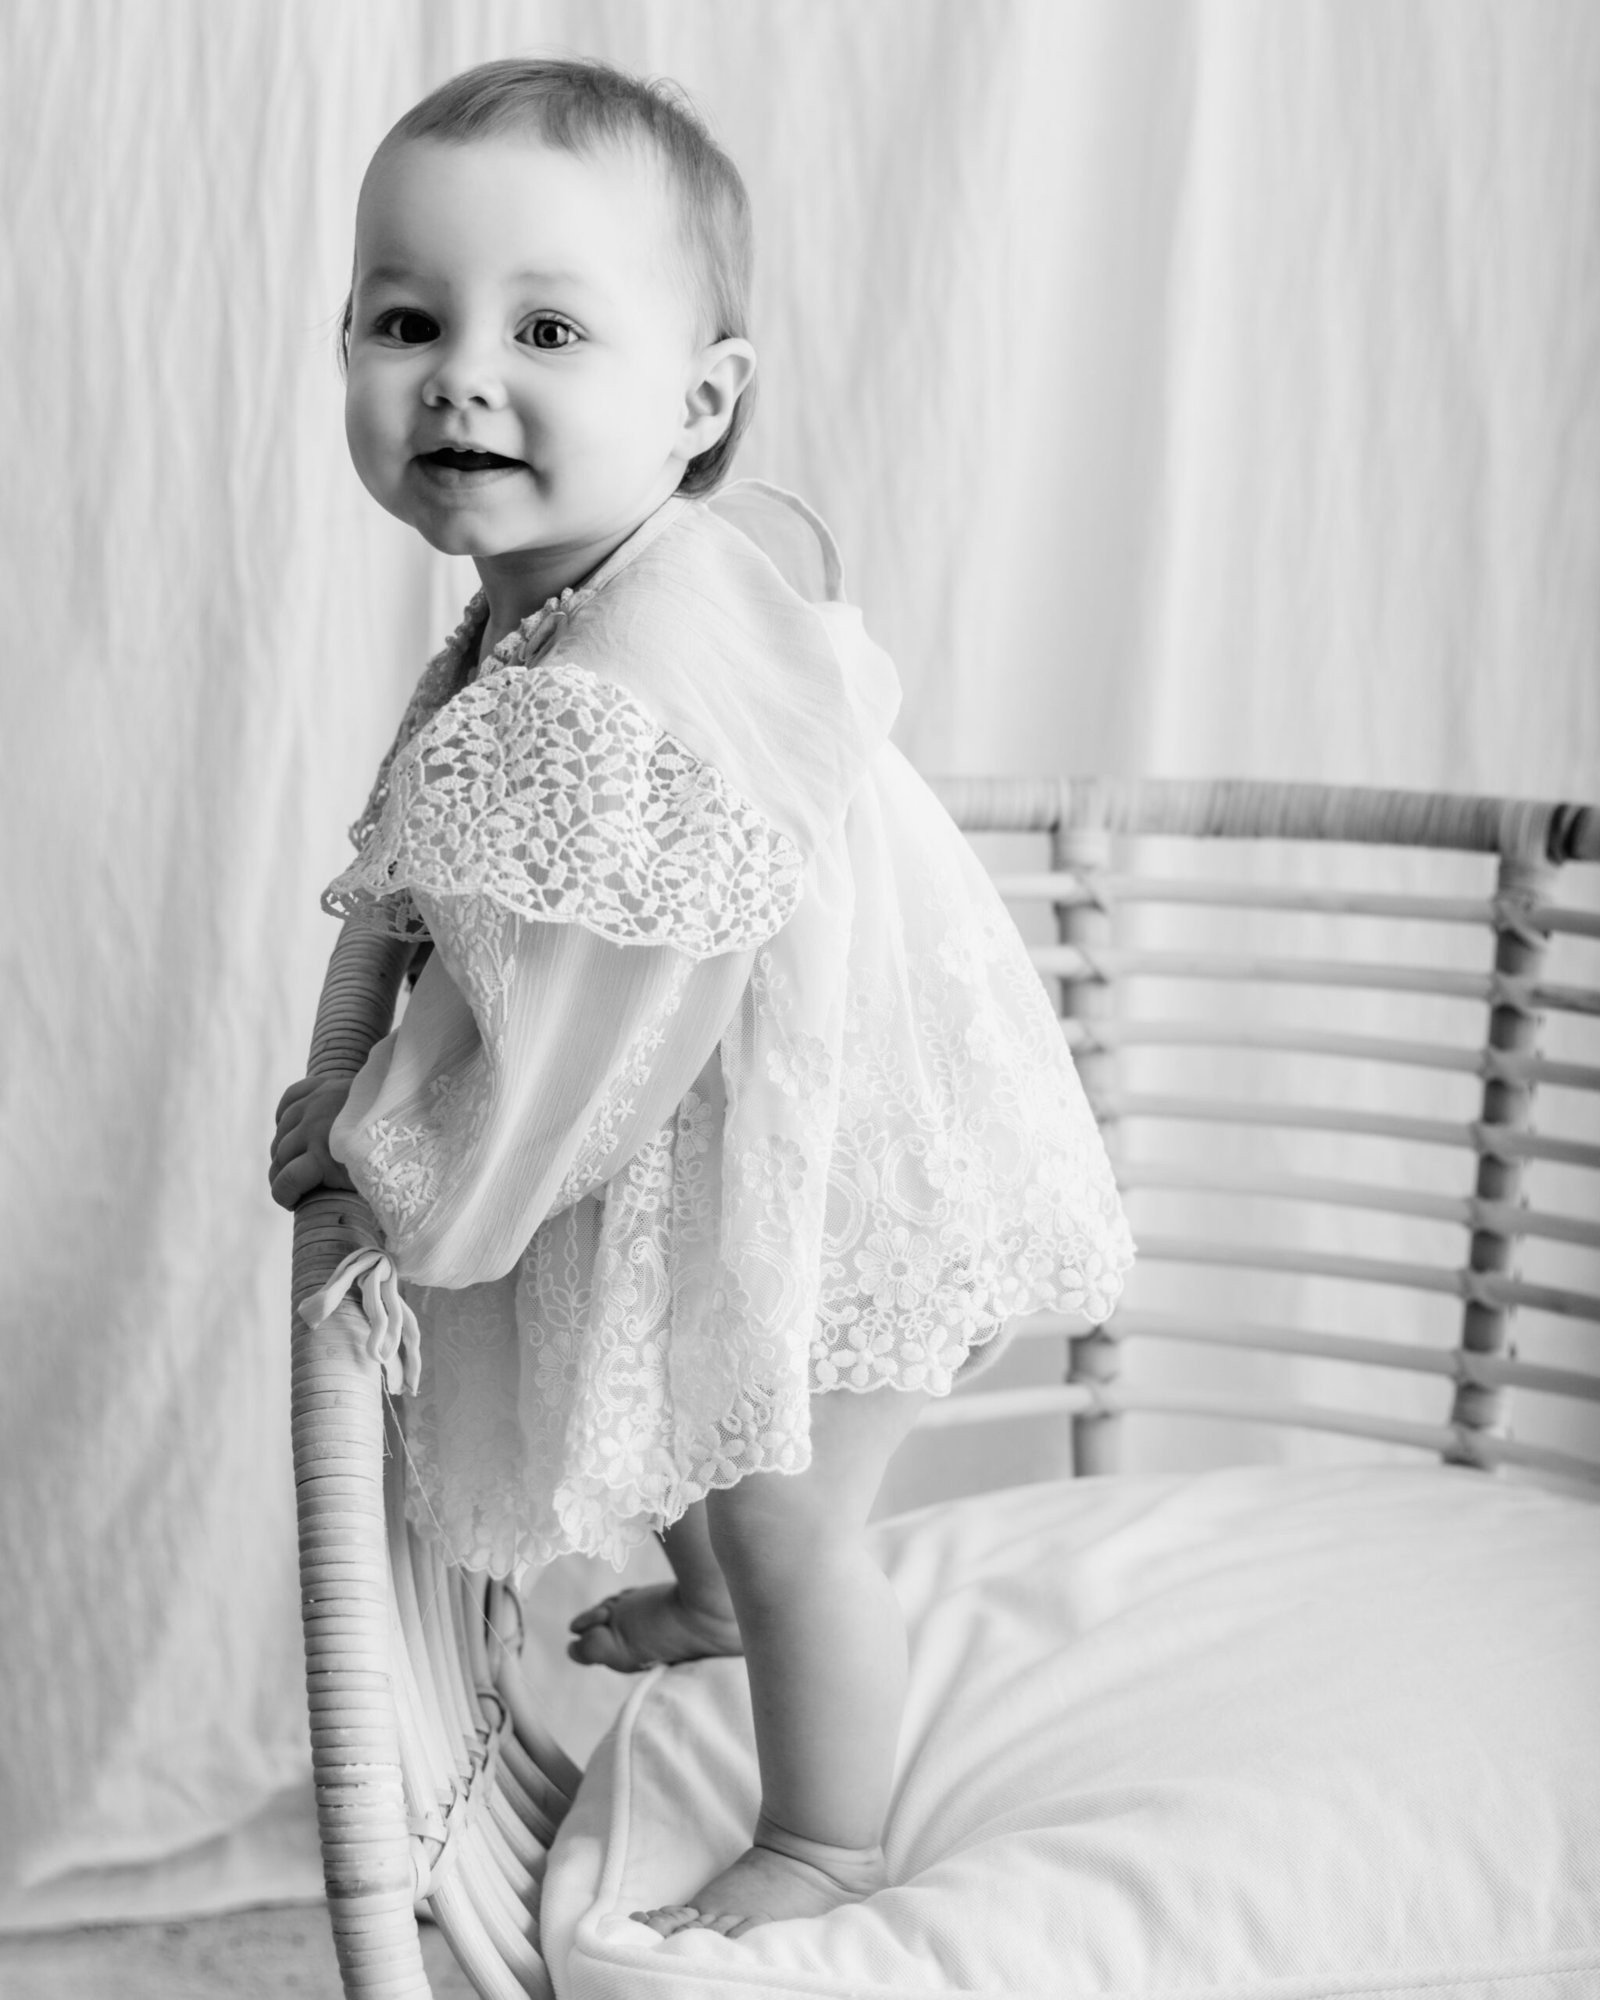 black and white image of a baby standing during a bradford baby photoshoot